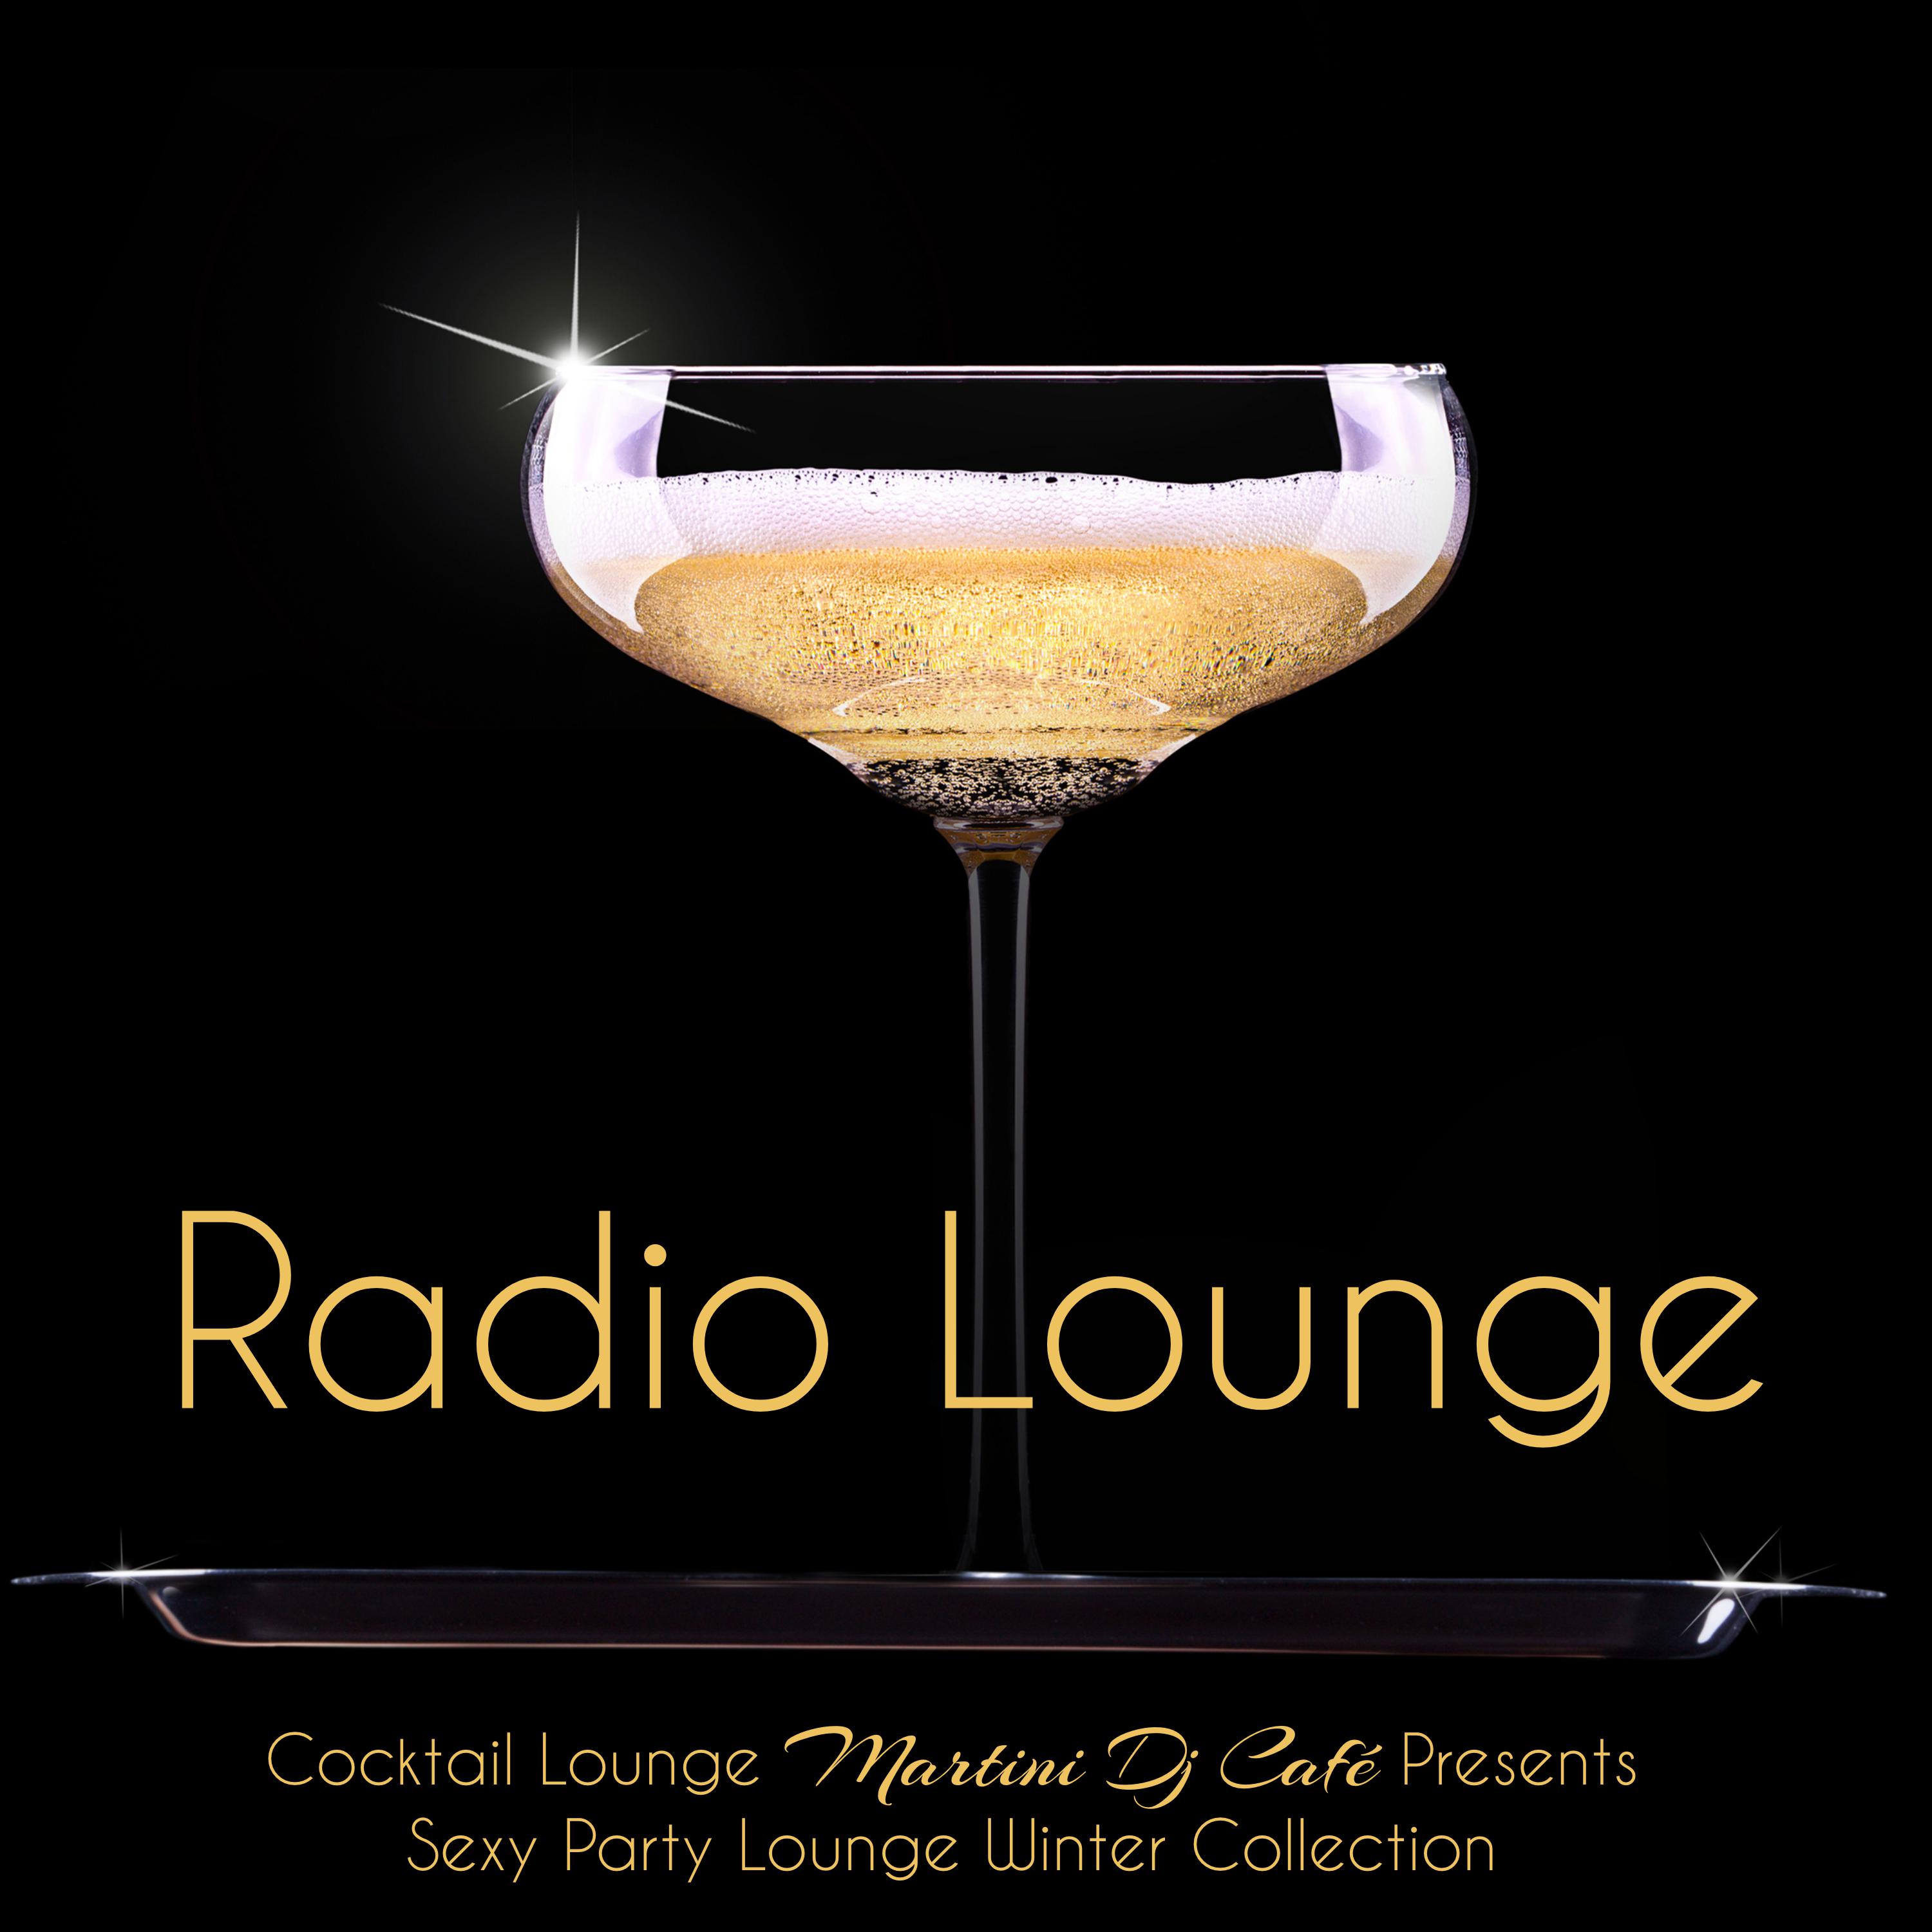 Radio Lounge  Cocktail Lounge Martini Dj Cafe Presents  Party Lounge Winter Collection